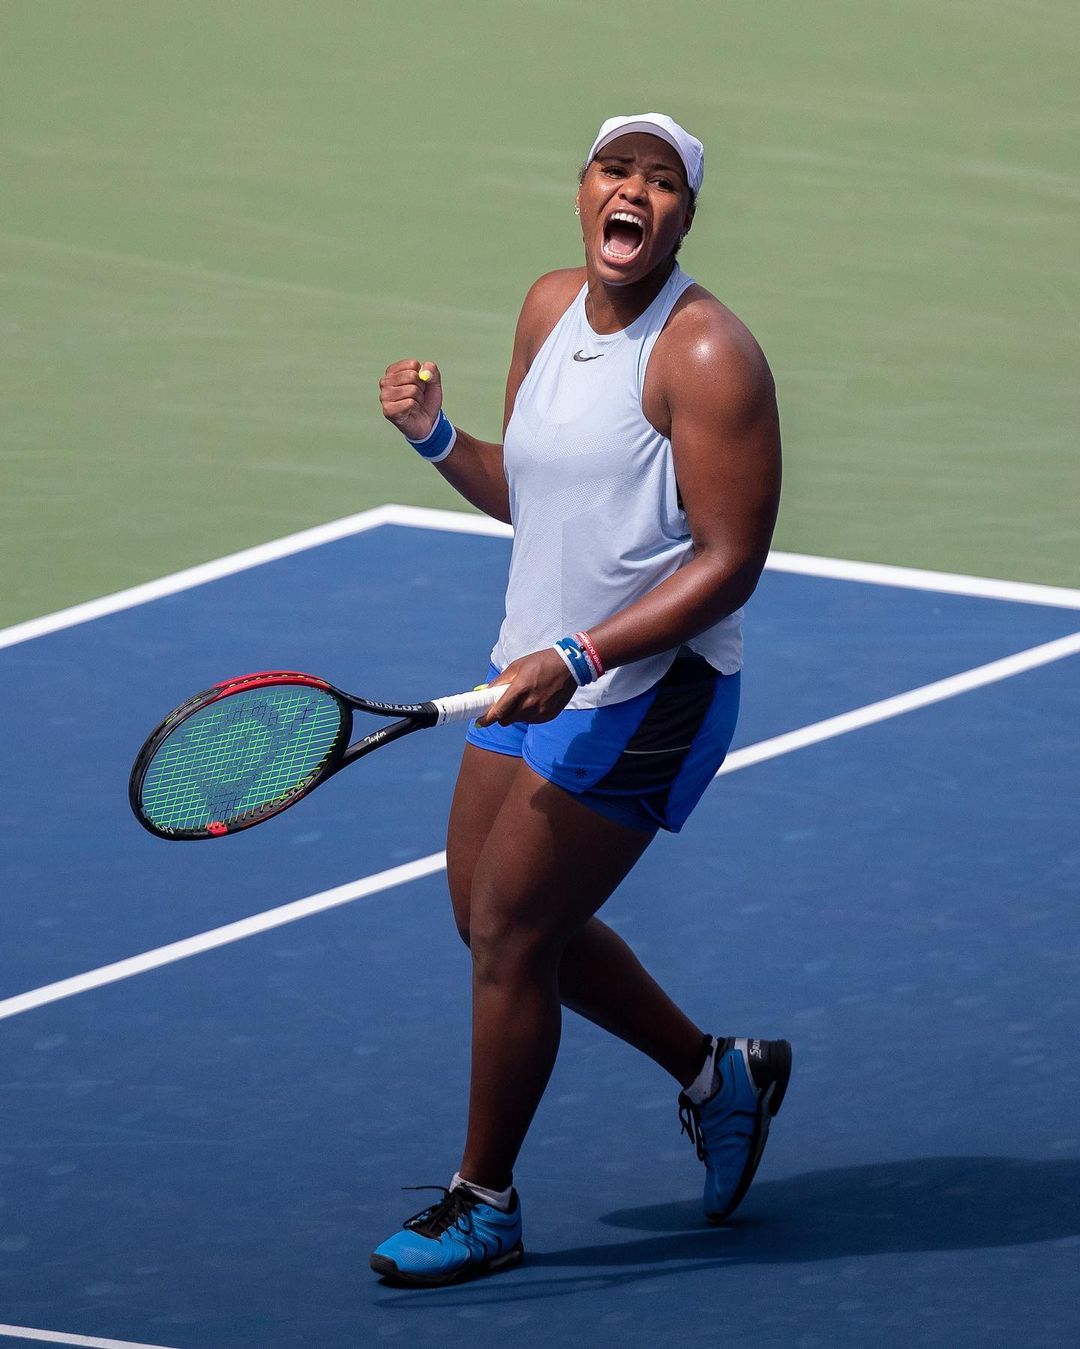 Taylor Townsend Husband Who is Taylor Townsend partner? Is Taylor